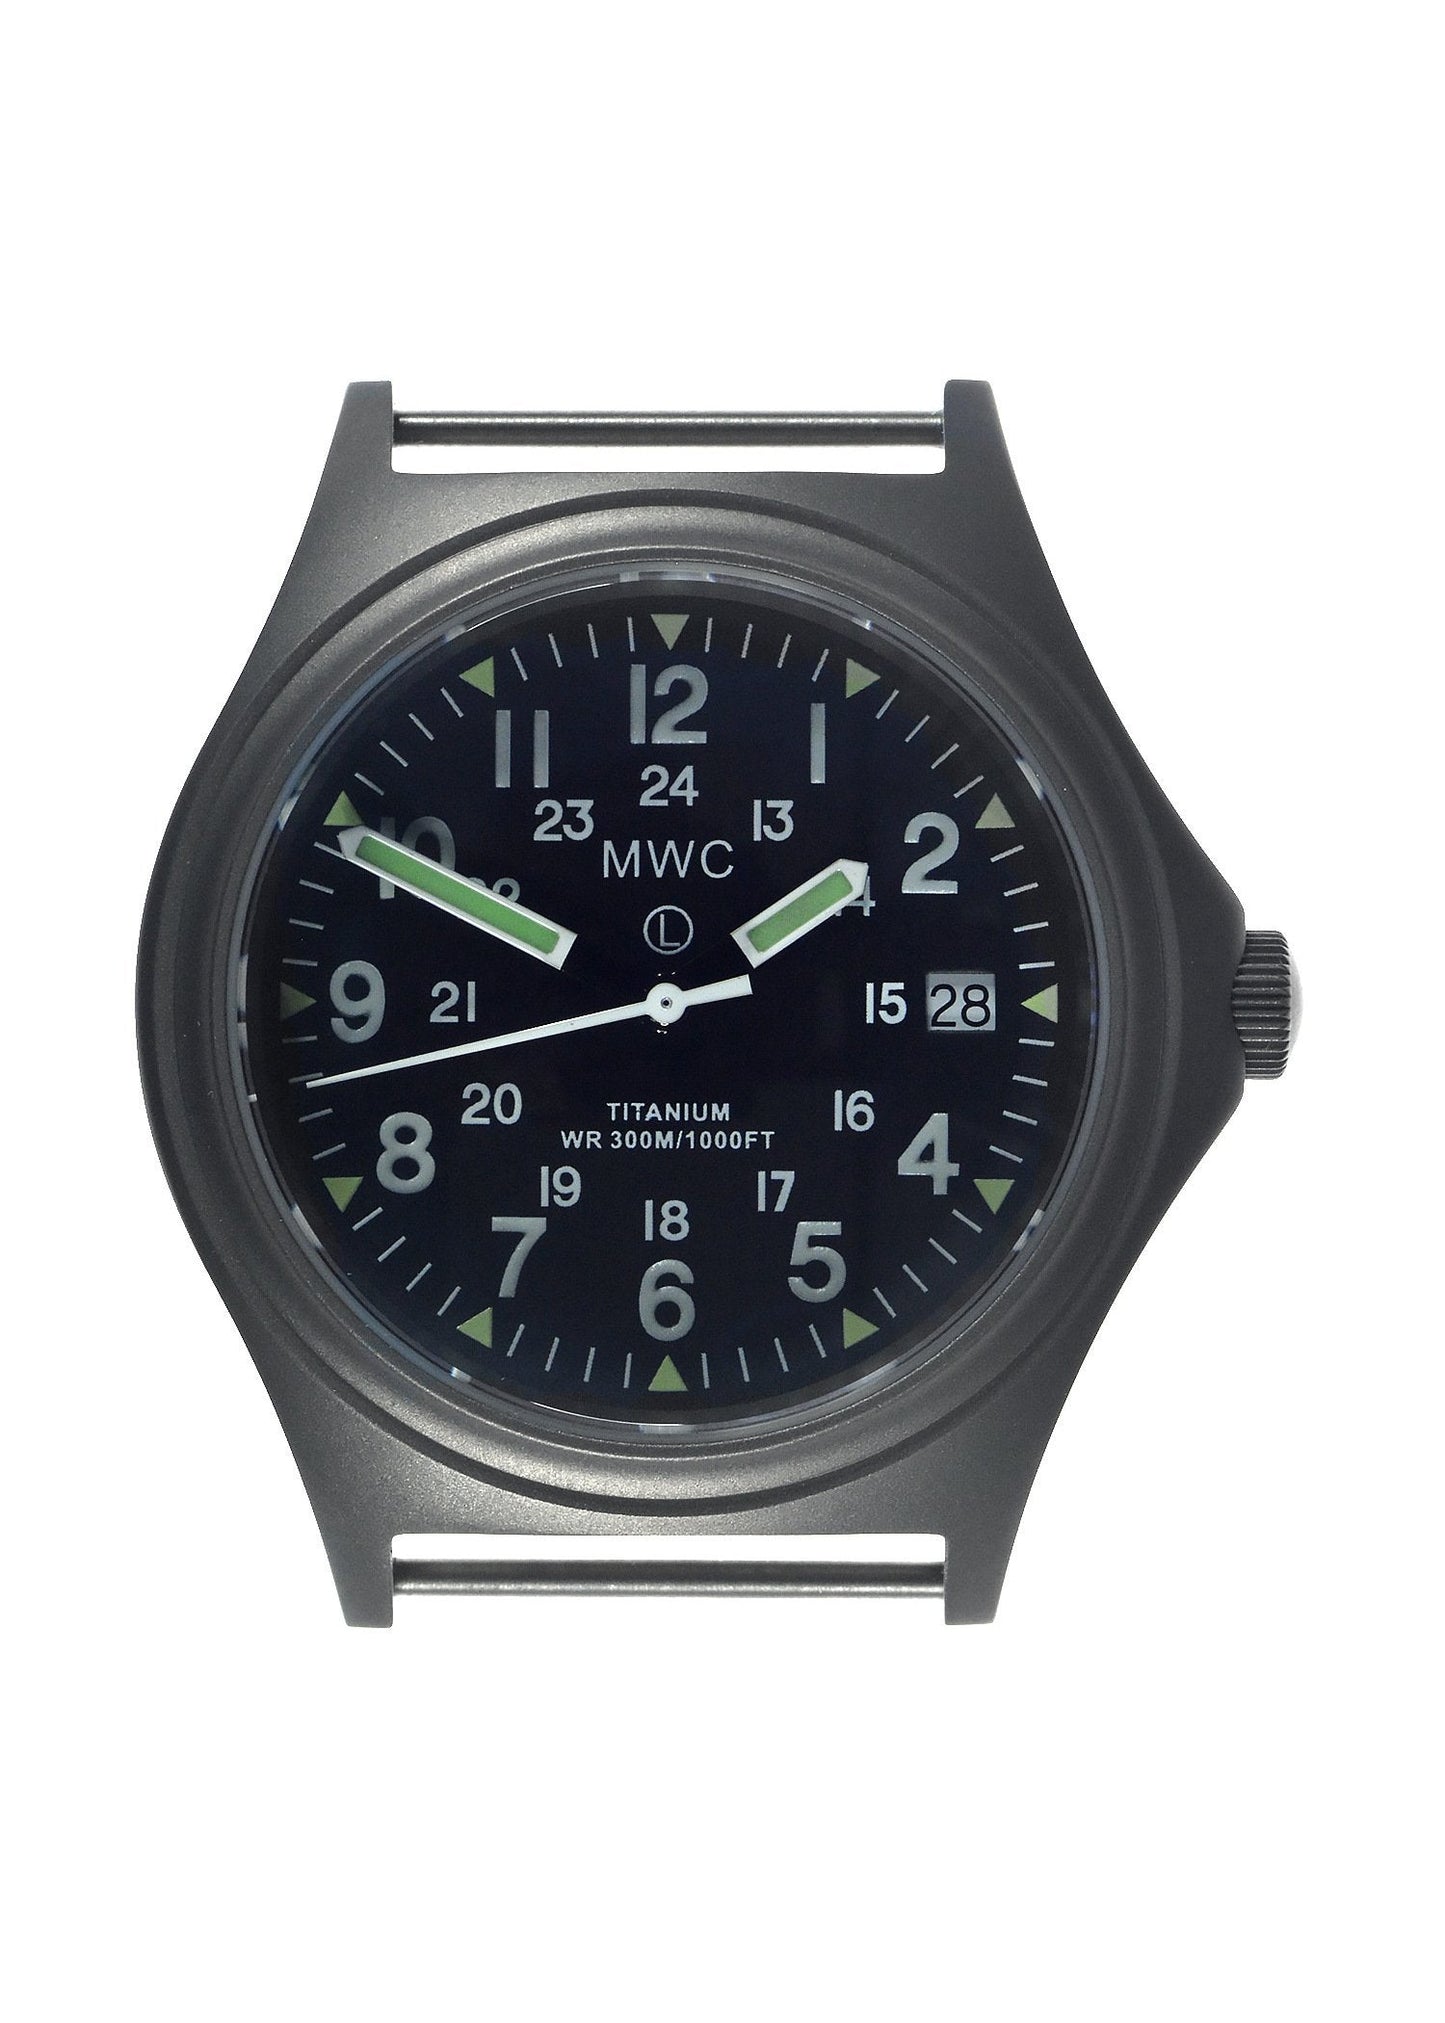 MWC Titanium General Service Watch, 300m Water Resistant, 10 Year Battery Life, Luminova, Sapphire Crystal and 12/24 Dial Format (Date Version)